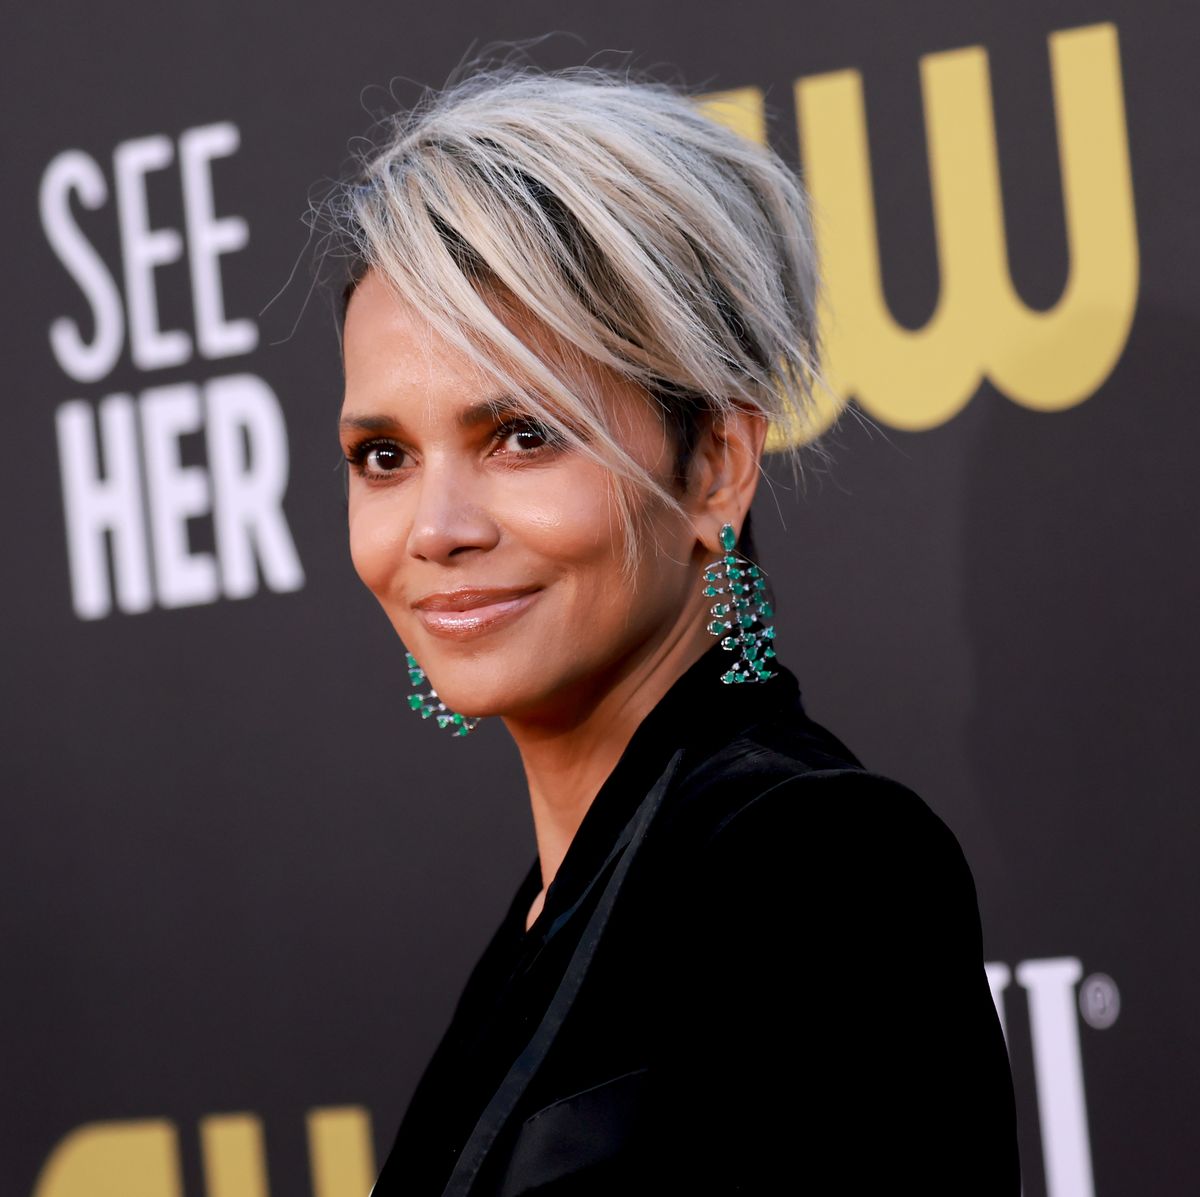 Halle Berry Swears These Must-Have Beauty Products Will Change